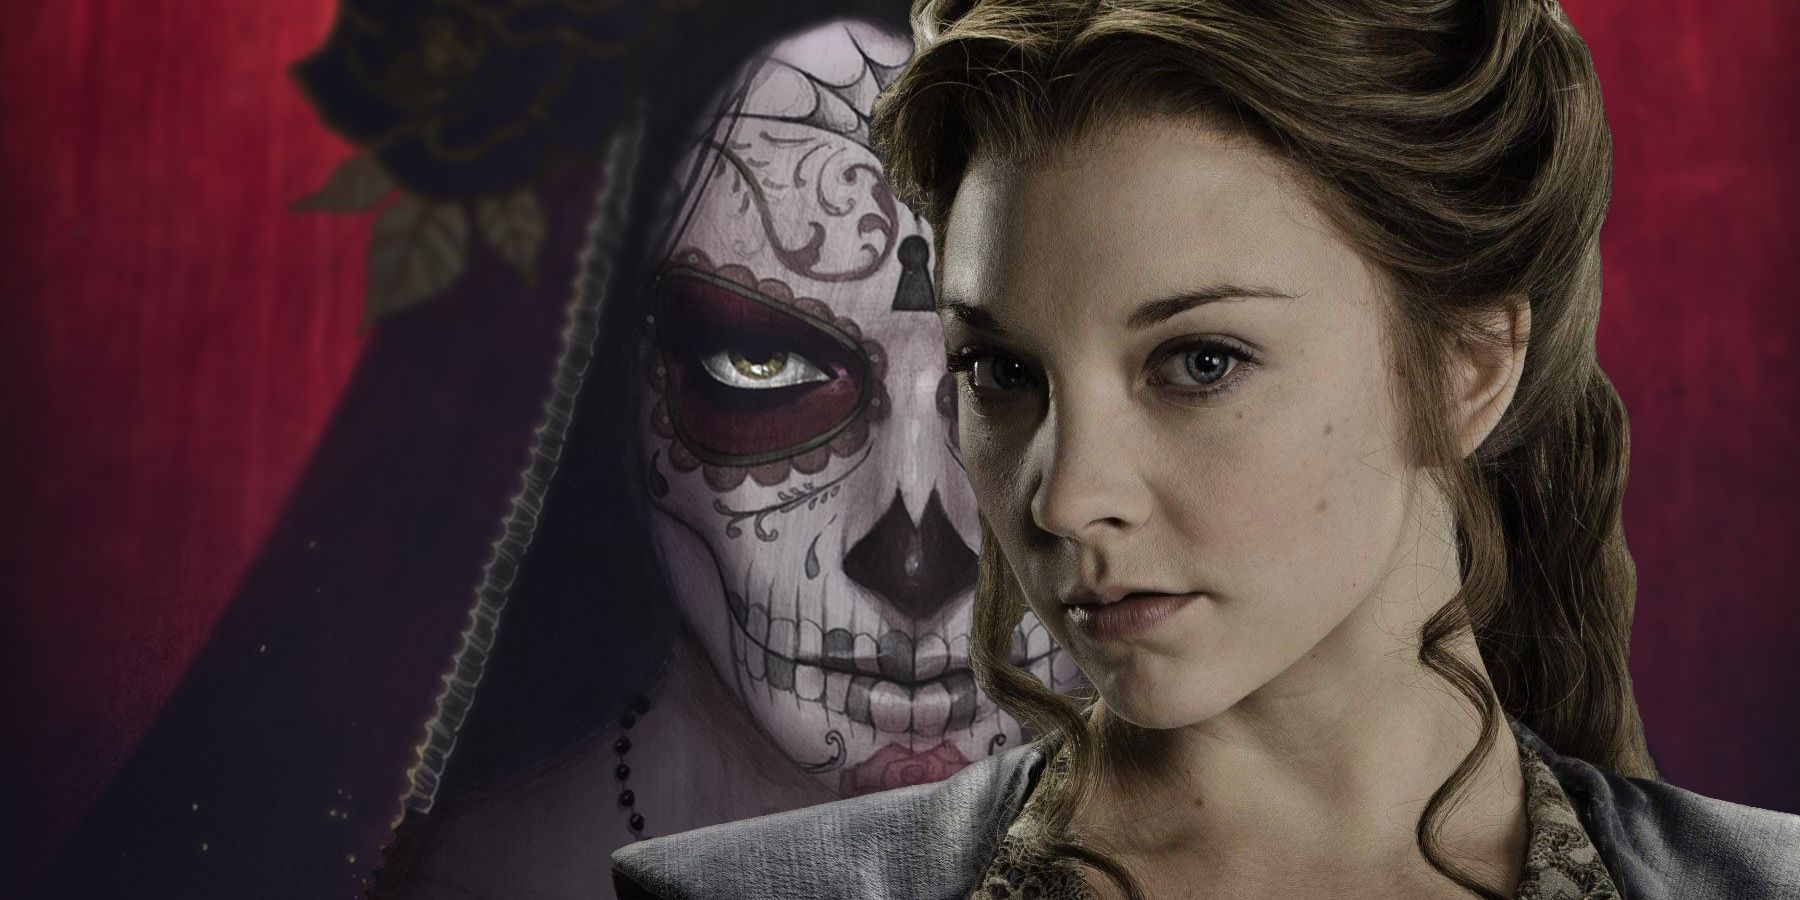 Natalie Dormer Penny Dreadful City of Angels Showtime